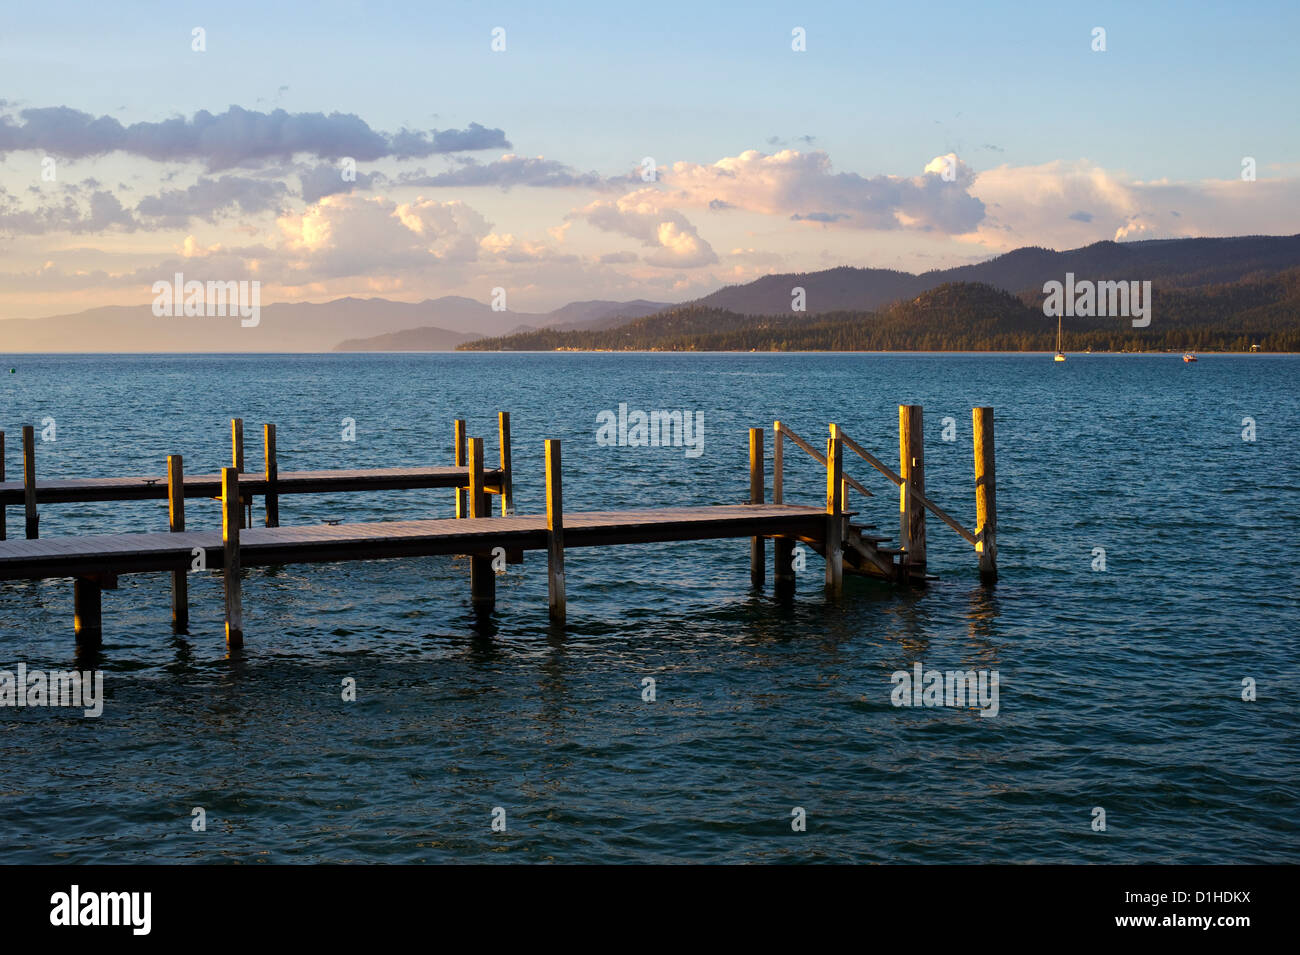 A pier is illuminated at sunset in South Lake Tahoe, CA. Stock Photo